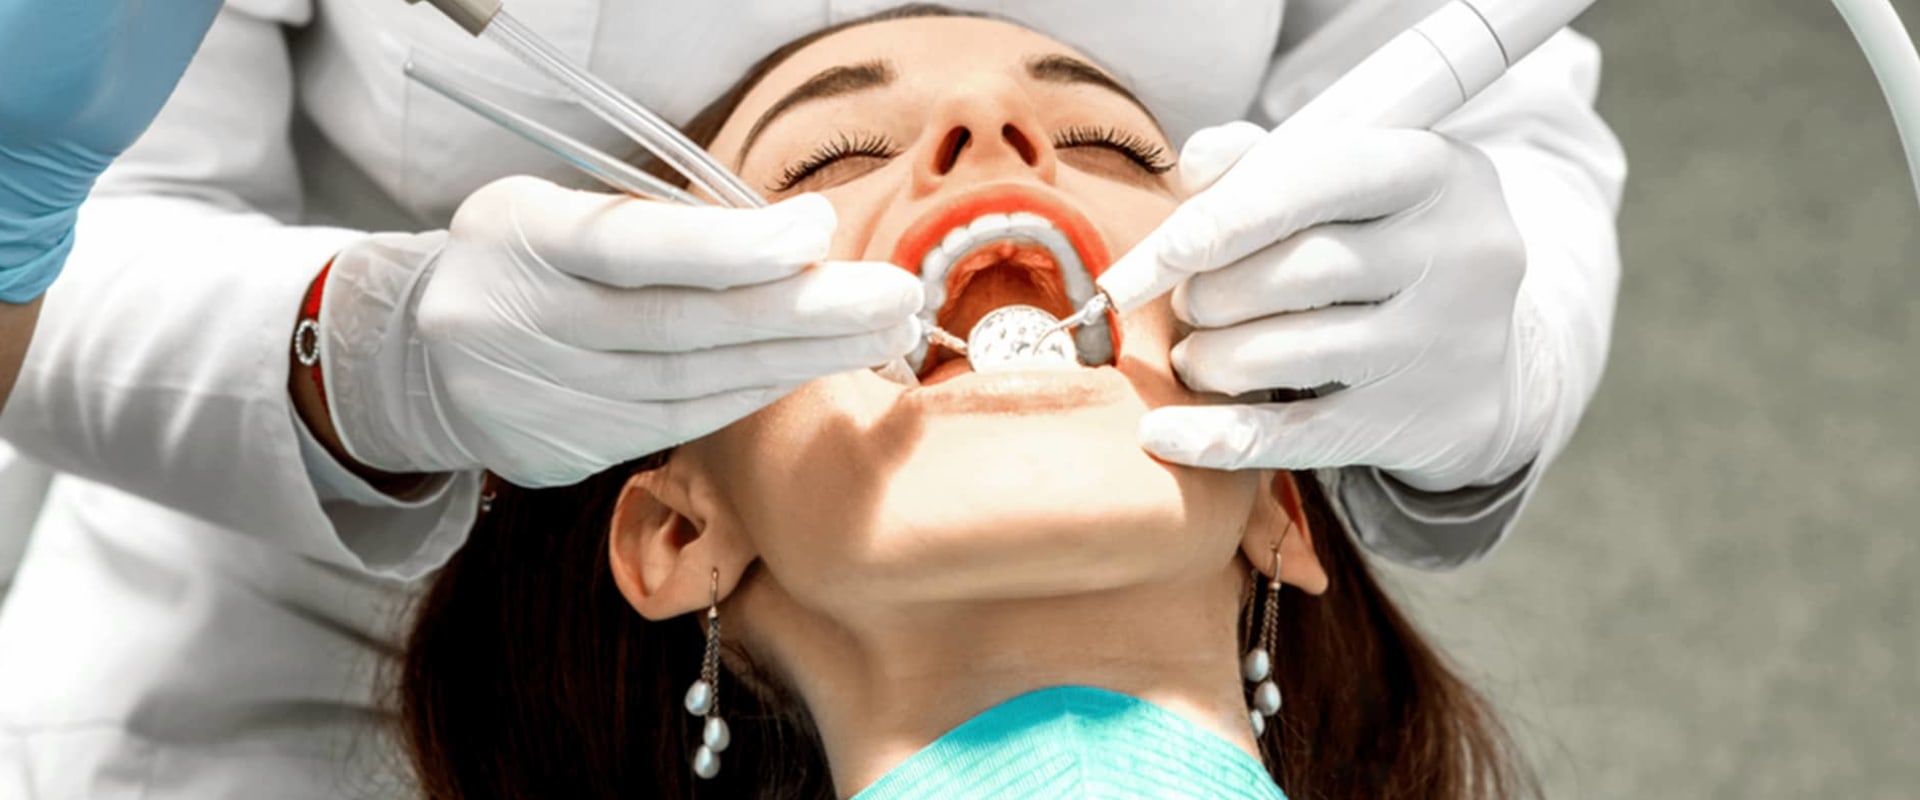 Minimizing Discomfort During Procedures: The Benefits of Sedation Dentistry